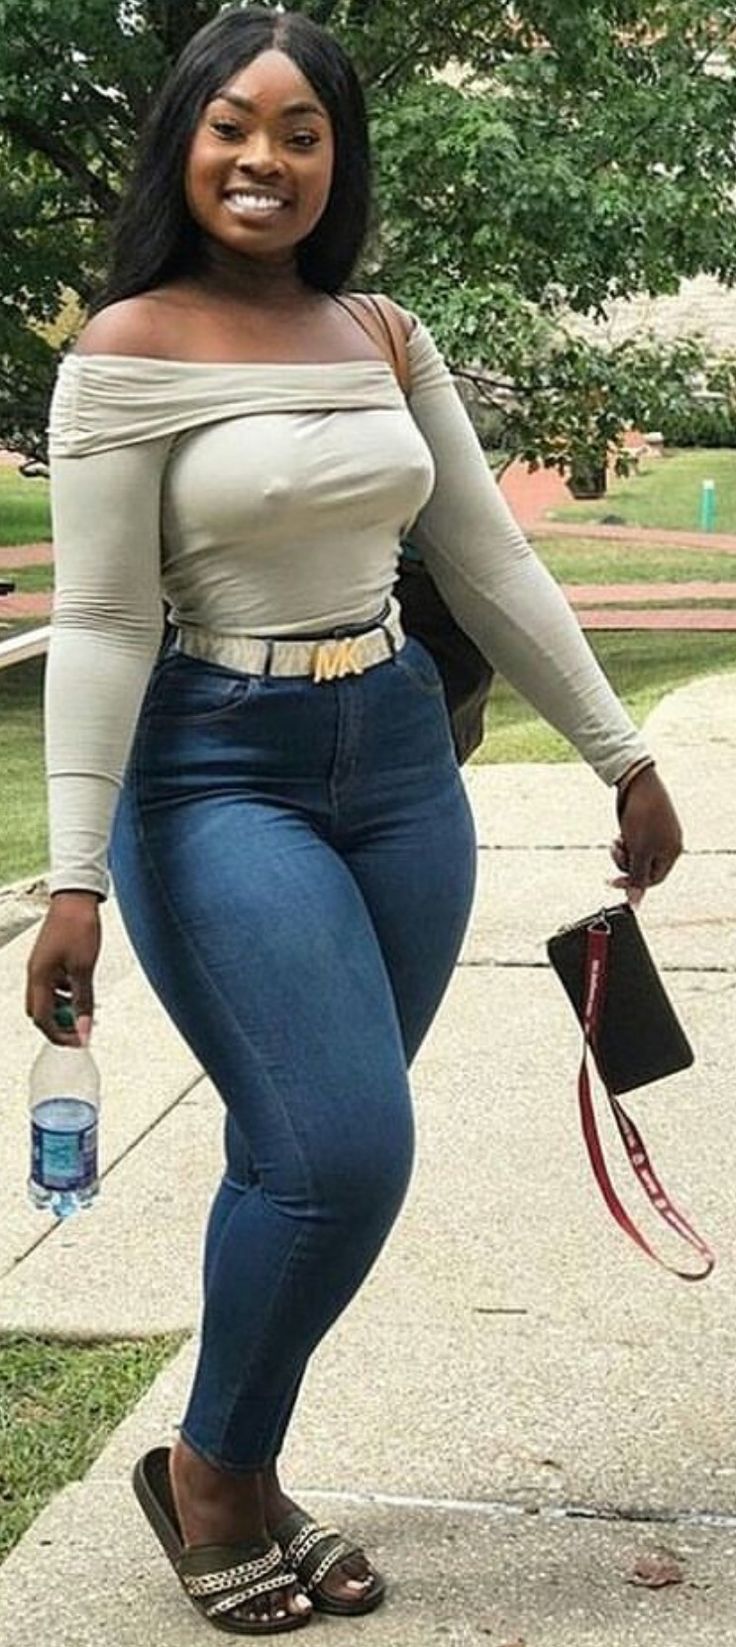 Best of Images of thick black women